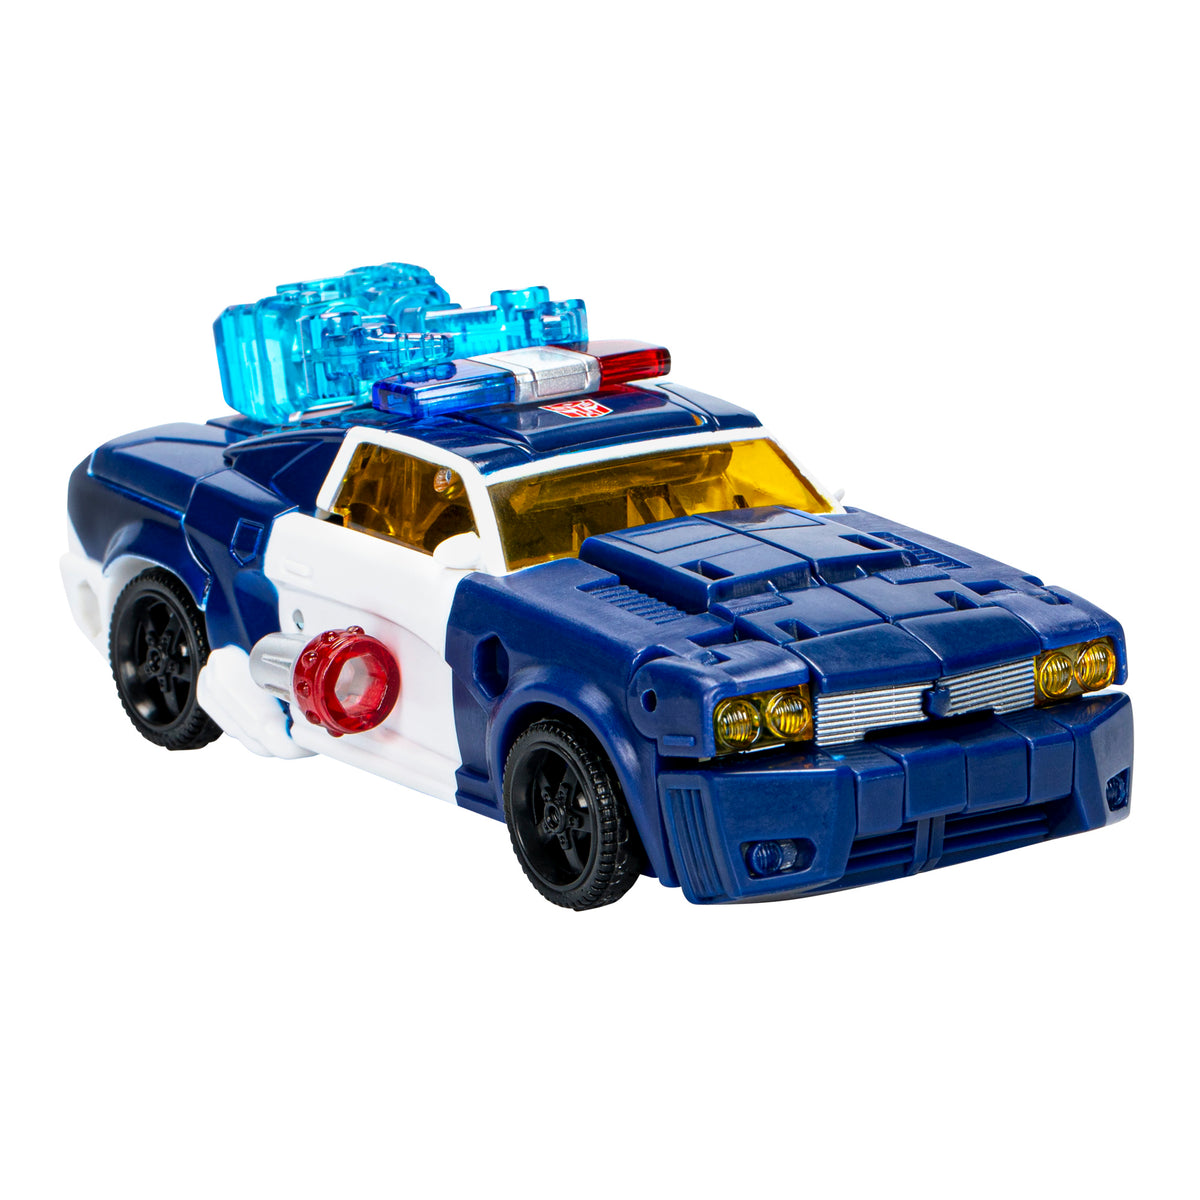 Transformers Legacy United Deluxe Class Animated Universe Bumblebee - –  Hasbro Pulse - UK